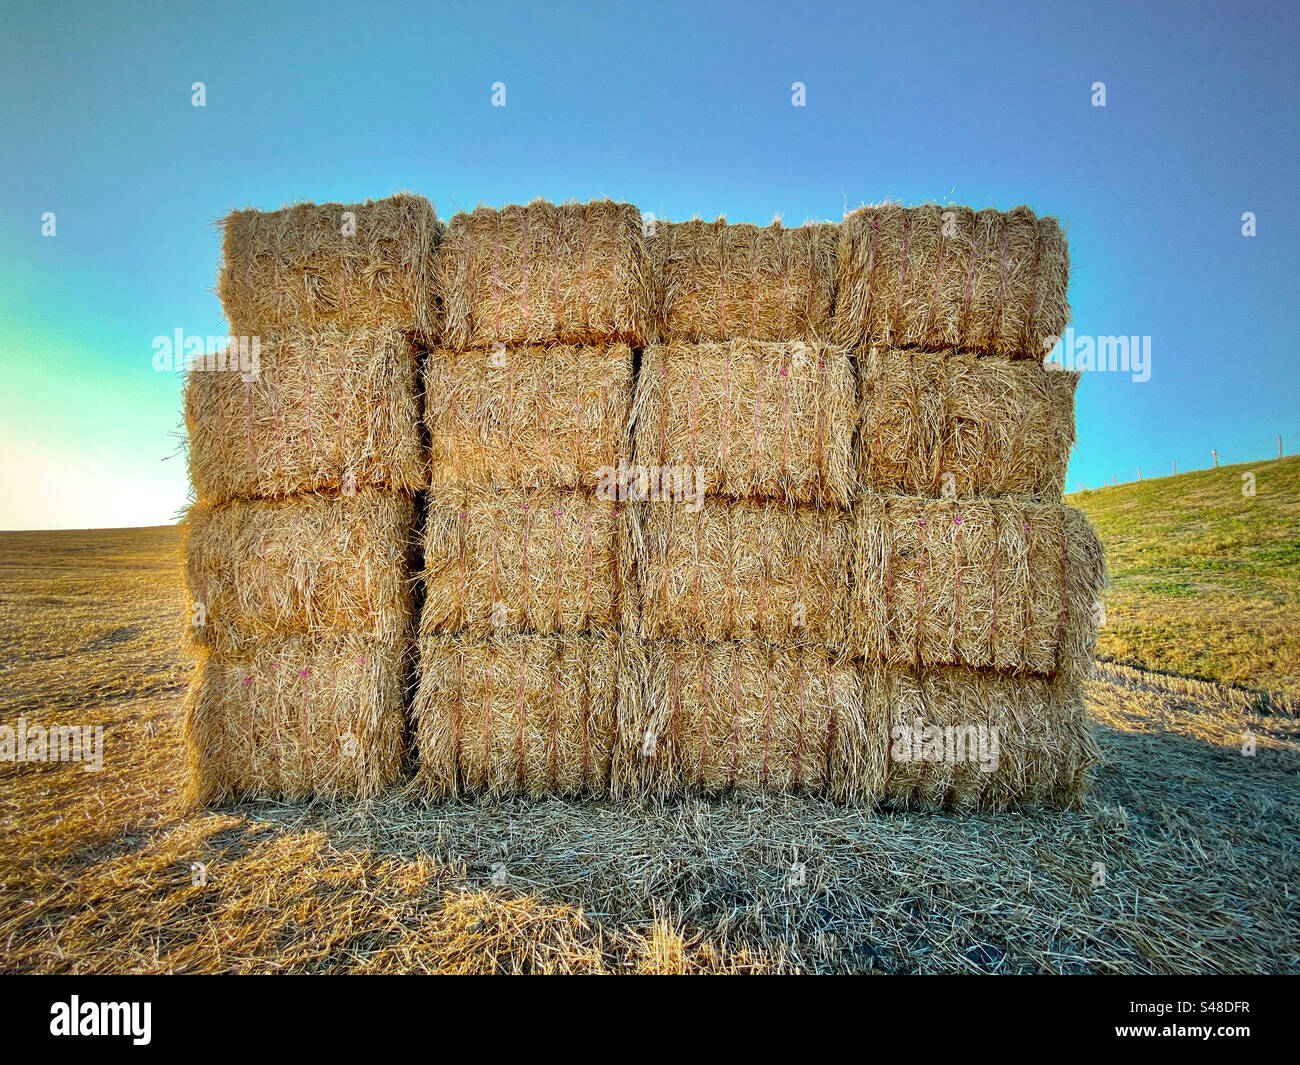 Bales of hay in the Tuscan countryside Stock Photo